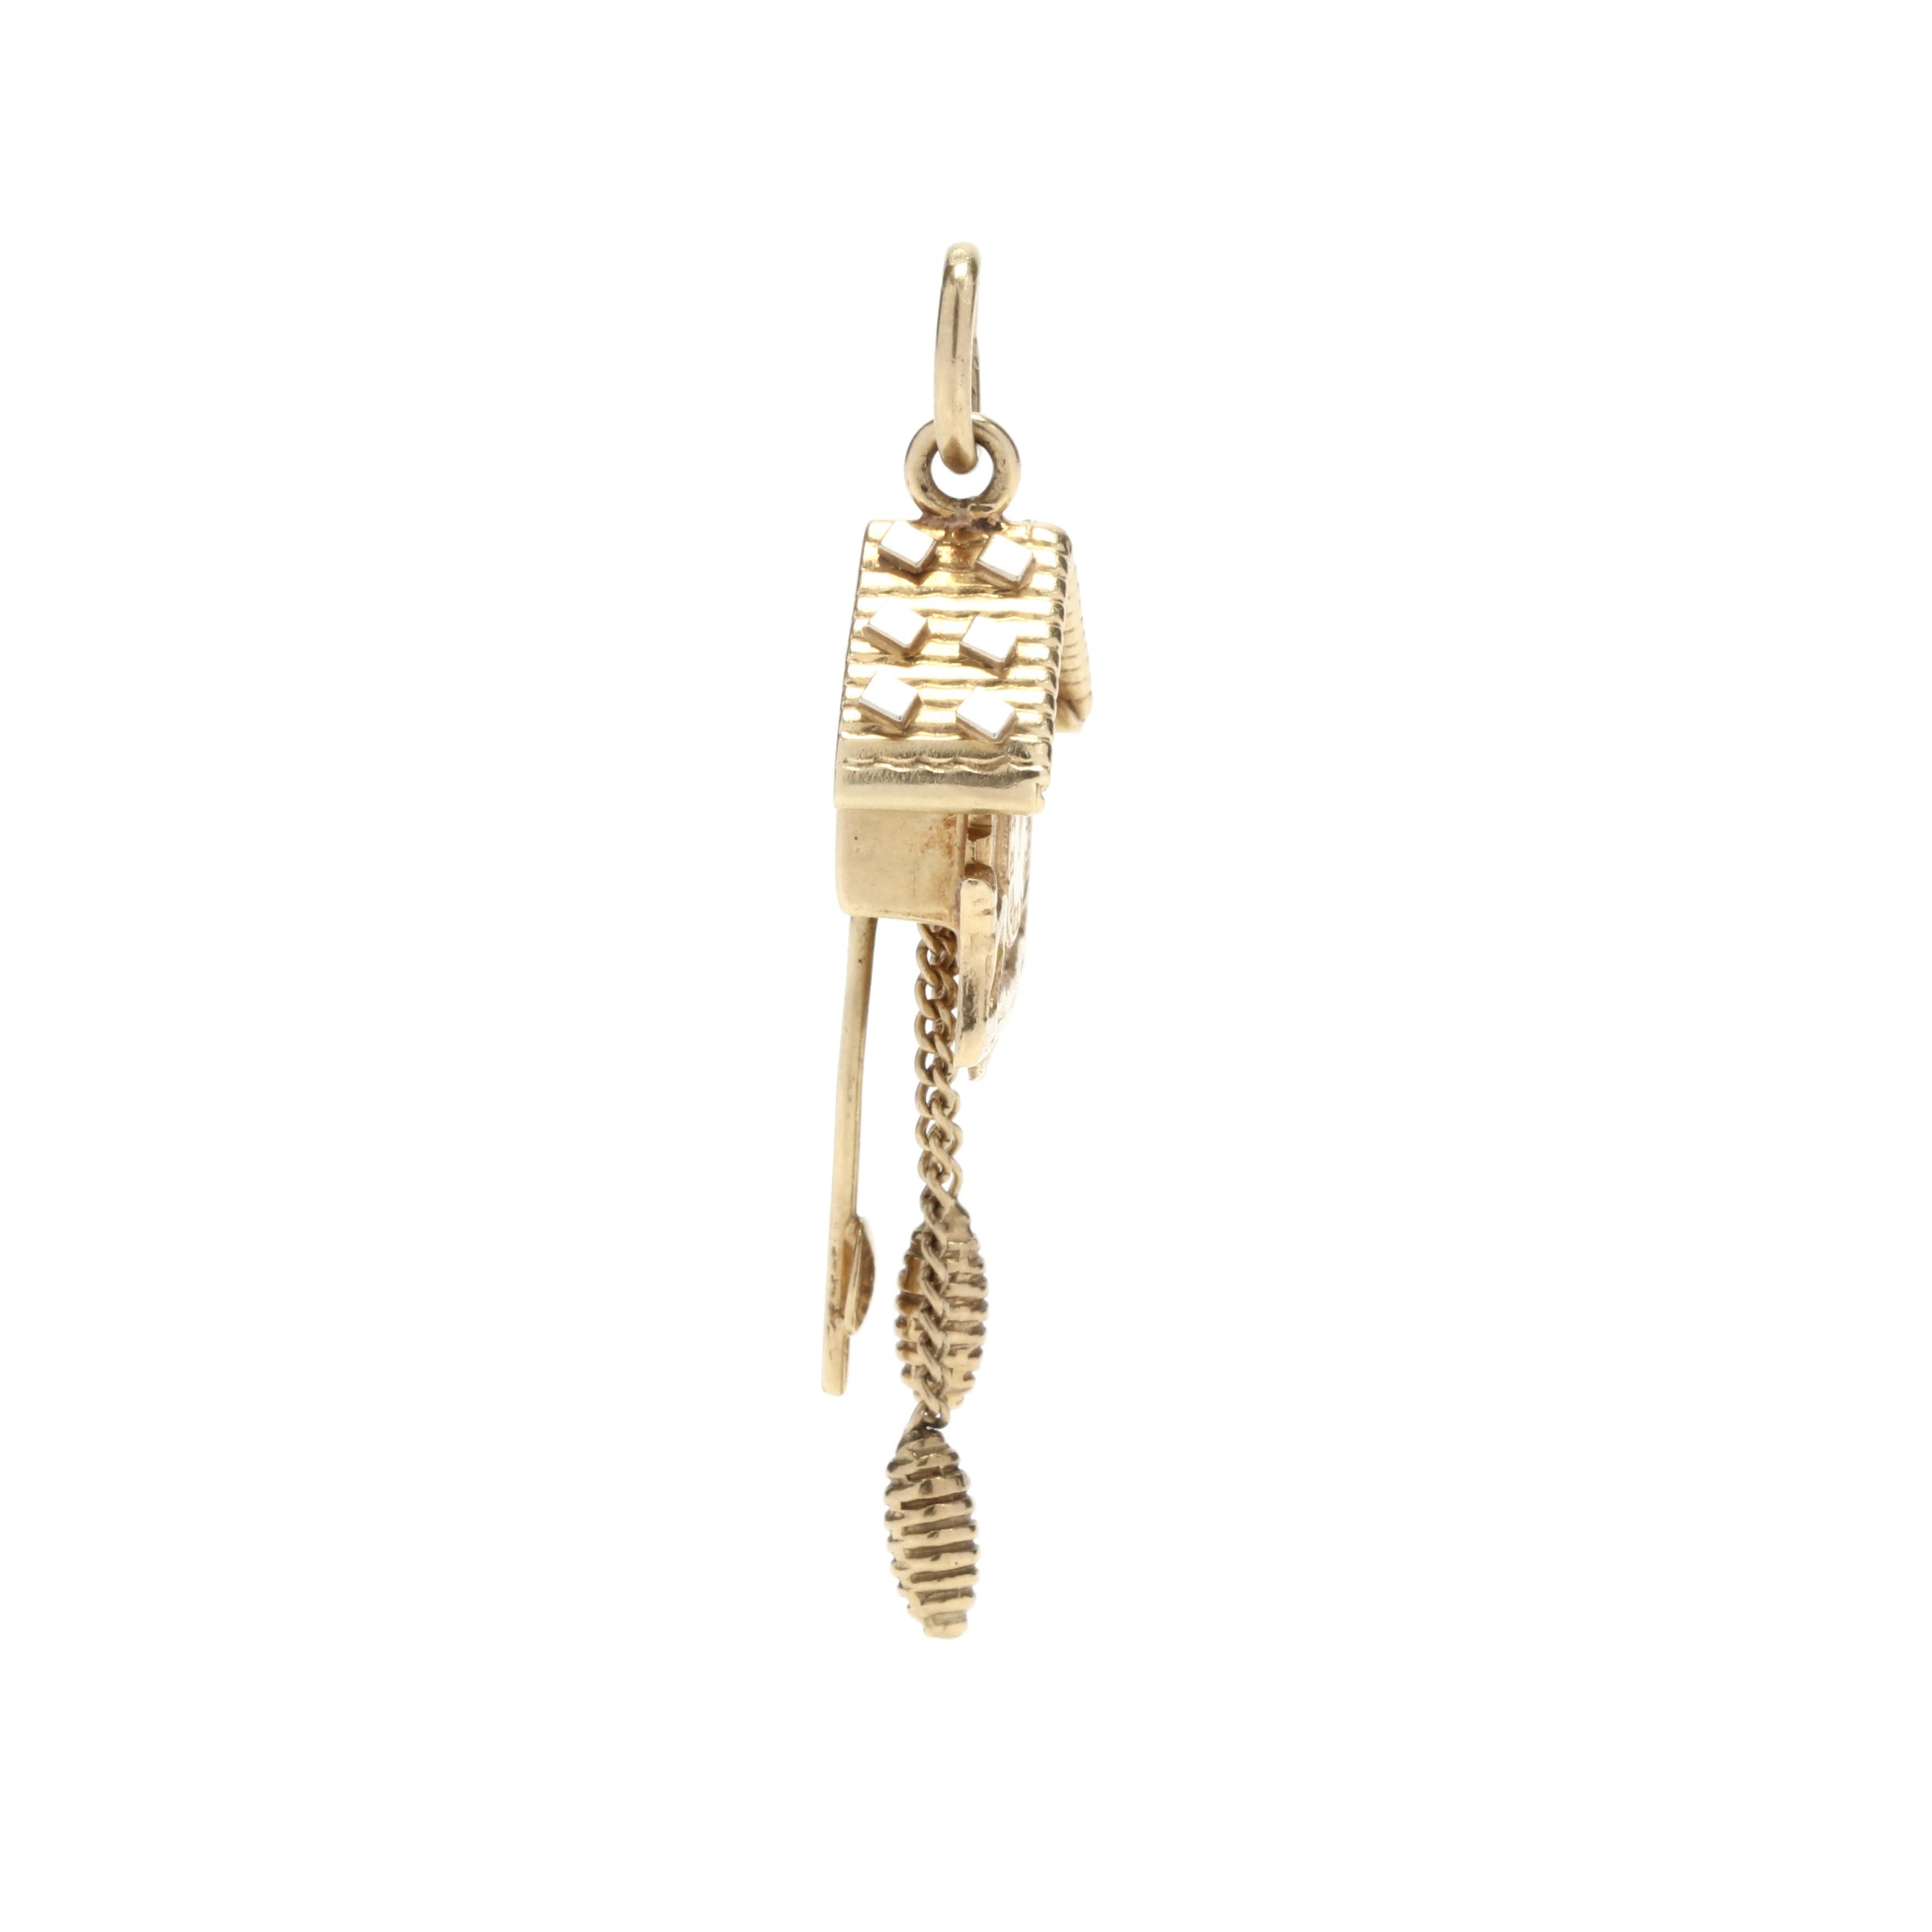 A vintage 18 karat yellow gold coo-coo clock charm. This charm features a birdhouse clock design with a tiny bird motif popping out of a window up top, two dangling pine cones and a swaying ticker.



Length: 1.5 in.



Width: 1/2 in.



Weight: 3.7